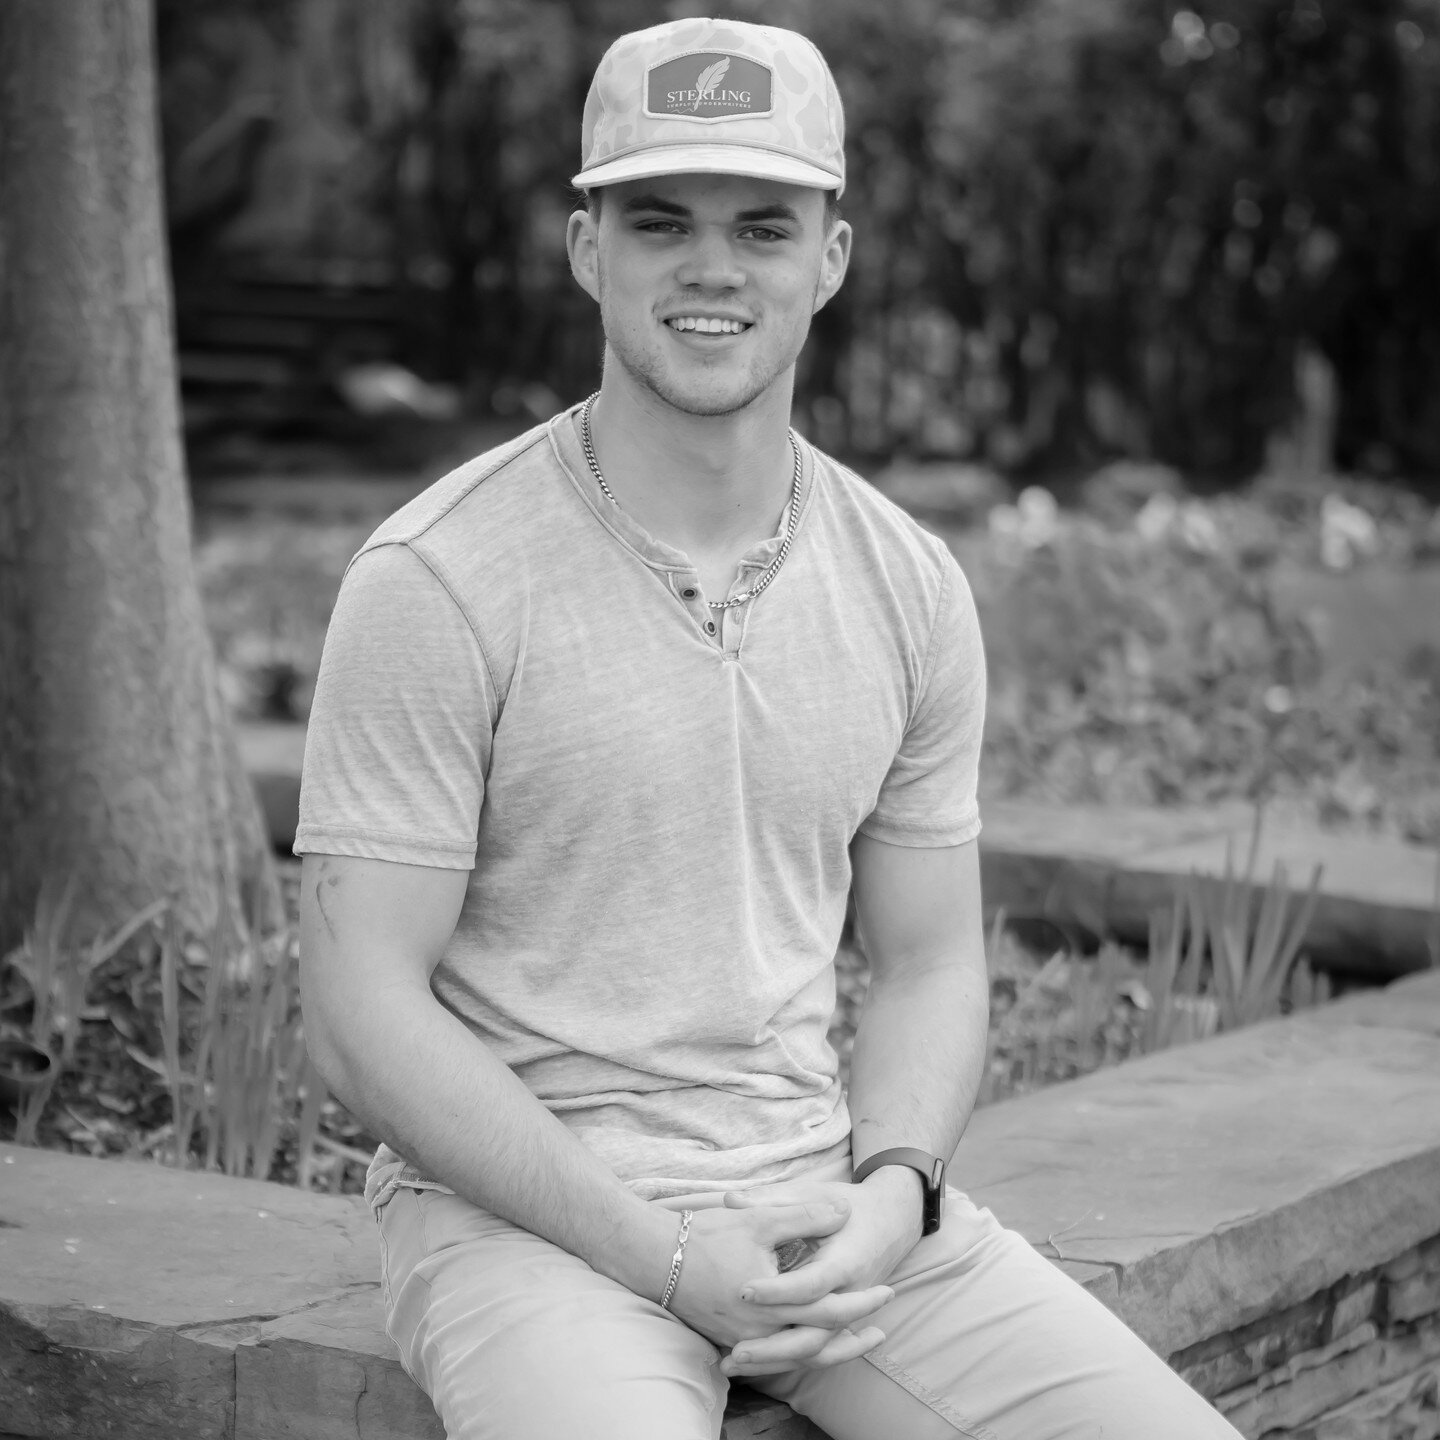 Meet the team Monday! Meet Maddox Moncrief. Maddox is our Marketing Specialist. He enjoys LSU football/baseball, riding dirt bikes, duck hunting, and golfing with friends and family. Maddox prides himself on being able to engage and be creative.